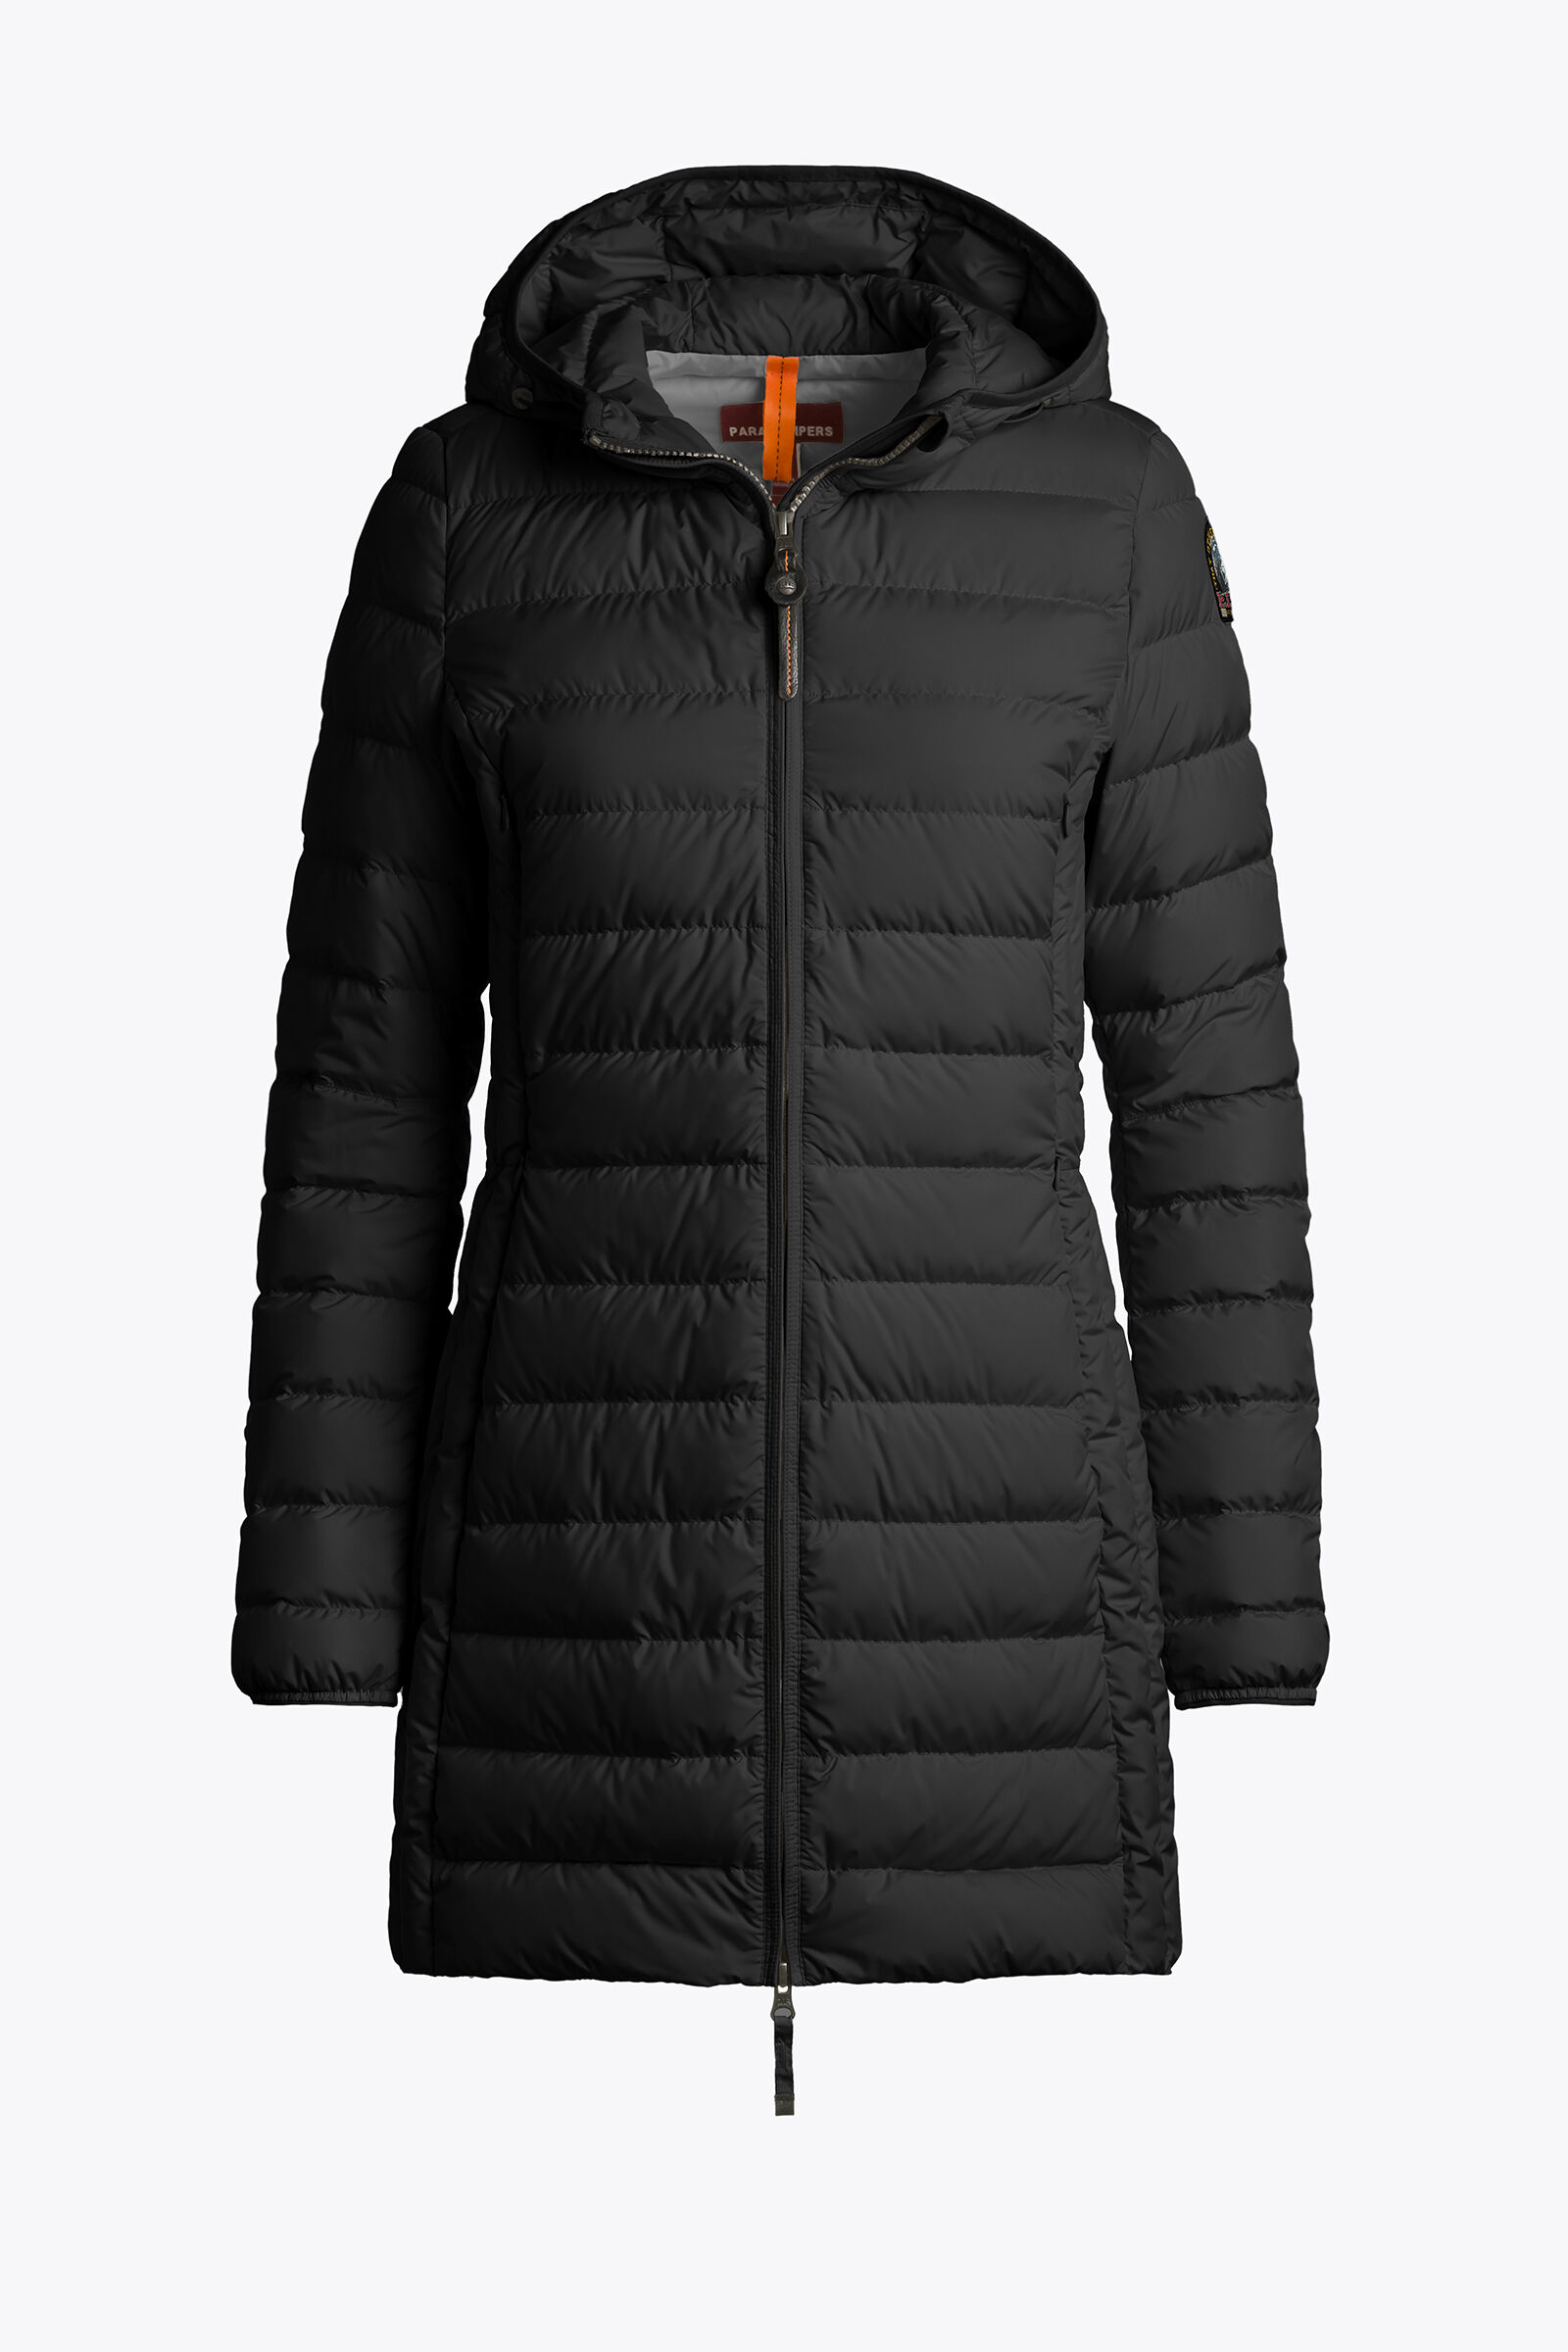 IRENE Puffers in BLACK for Women | Parajumpers®